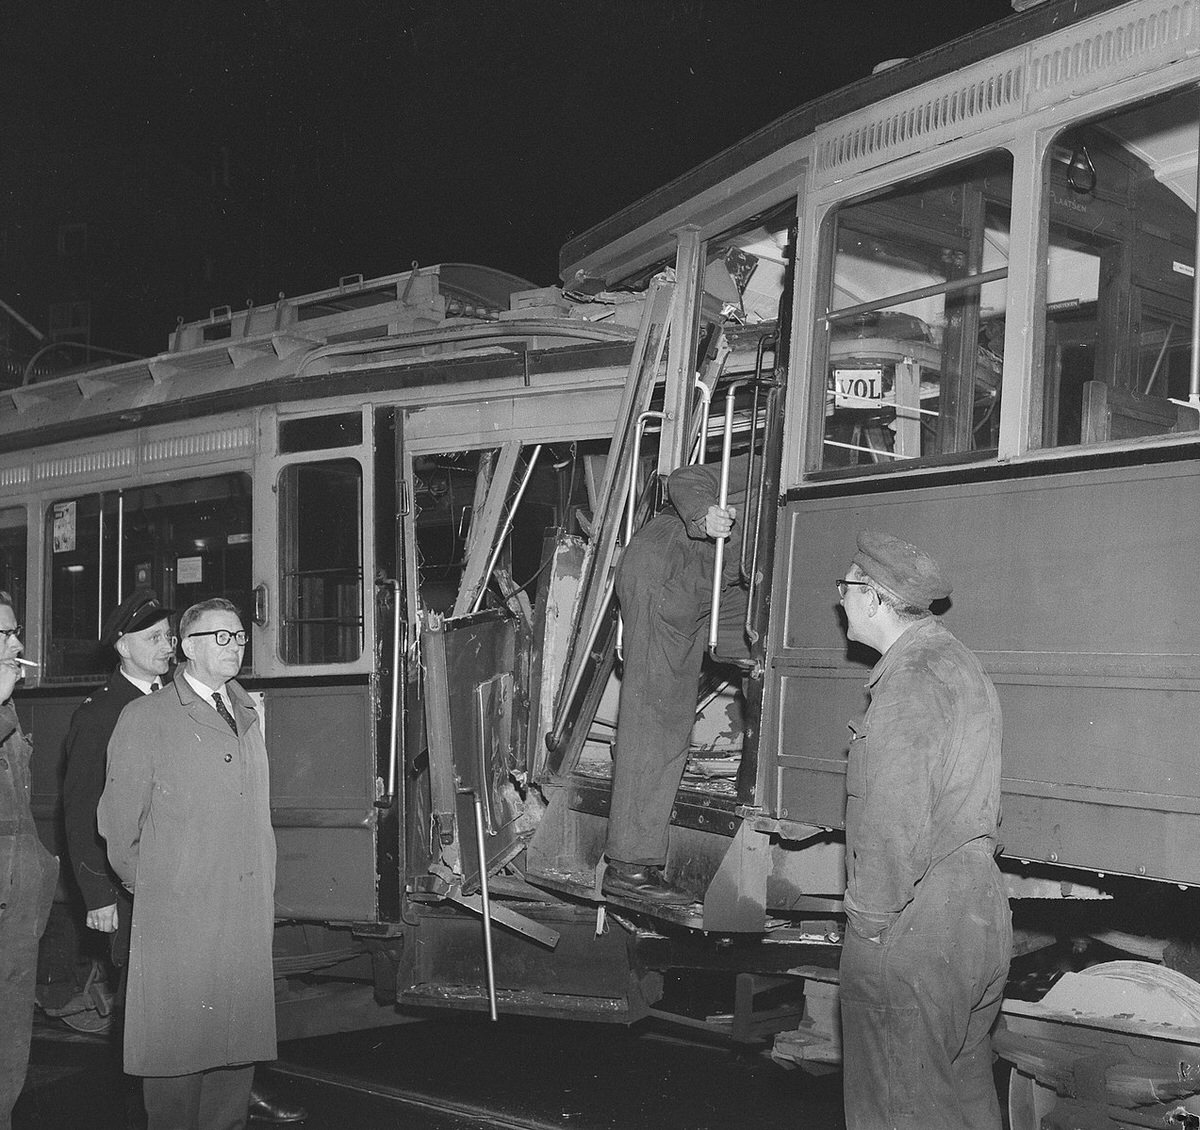 Collision between line 3 and line 3 on the Insulindeweg the trams collided, October 9, 1960